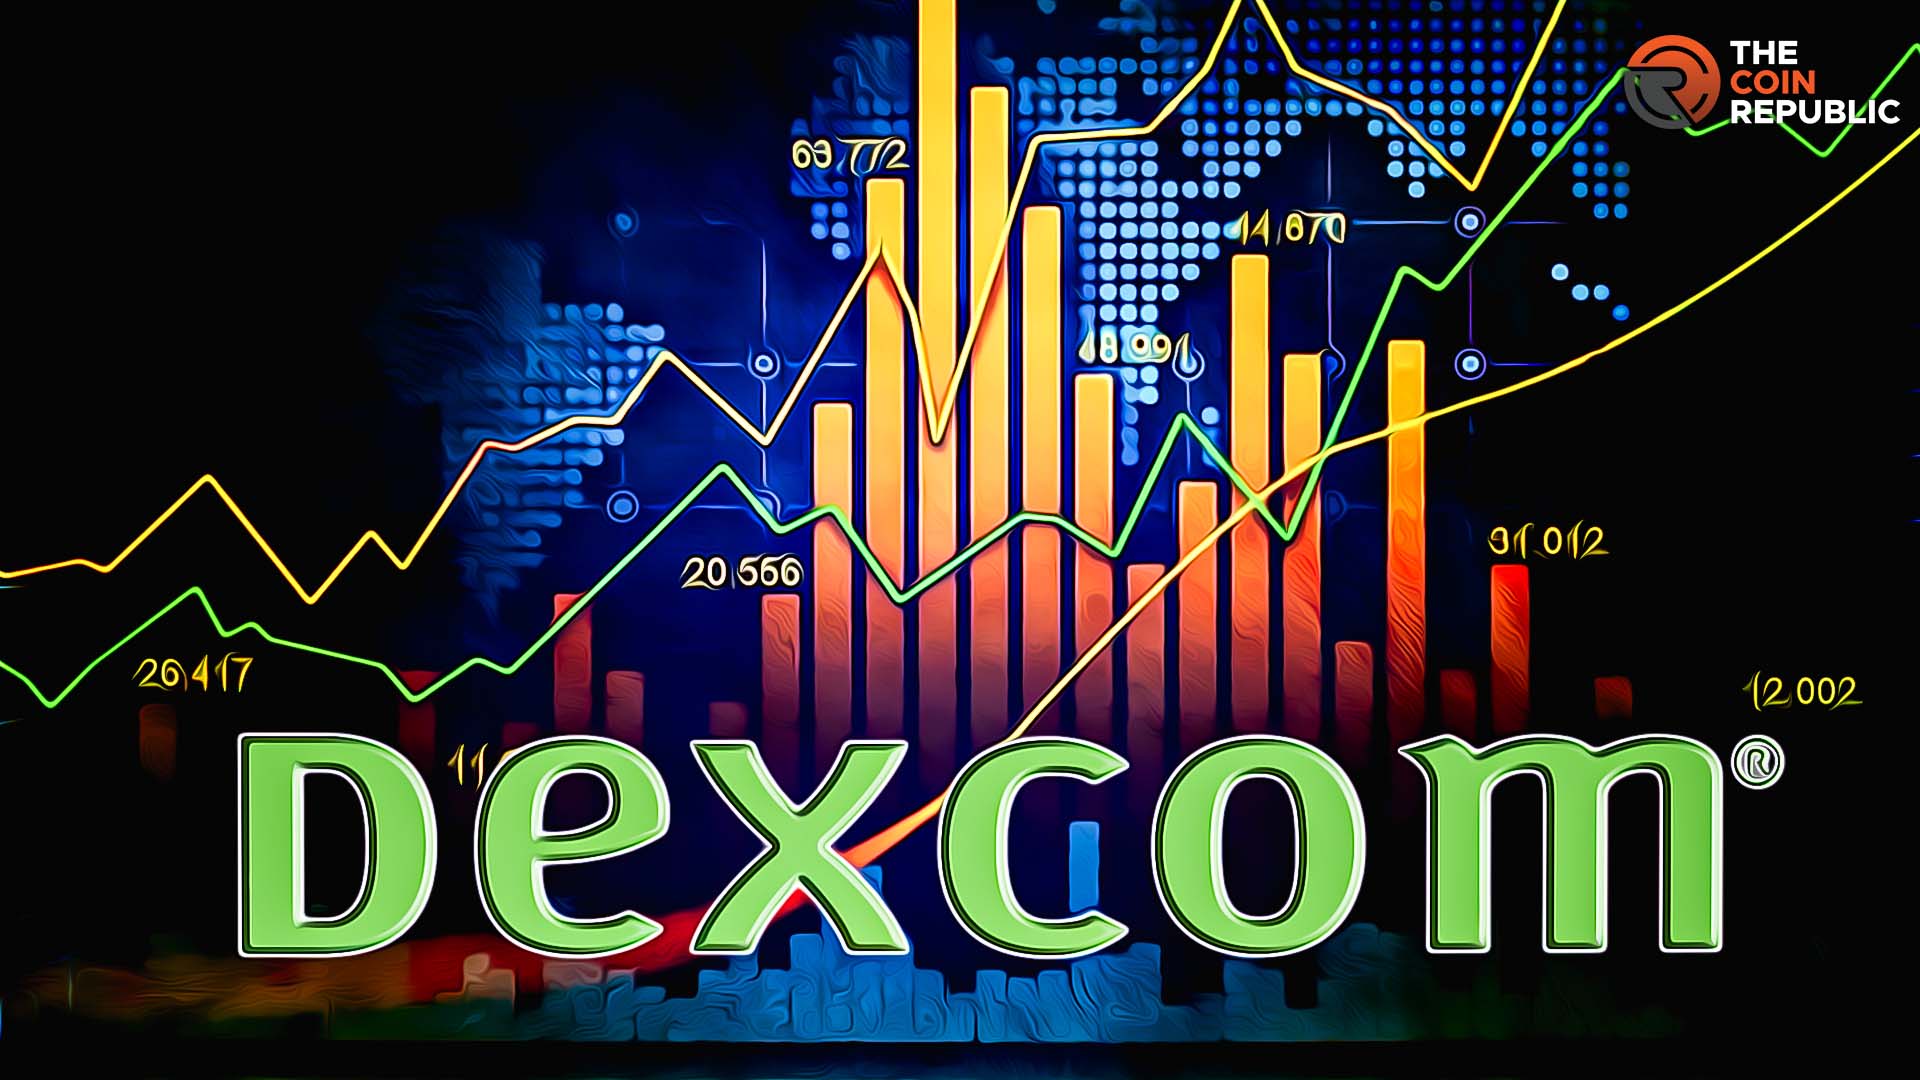 DexCom INC (NYSE: DXCM): Price on the Verge of a Breakout